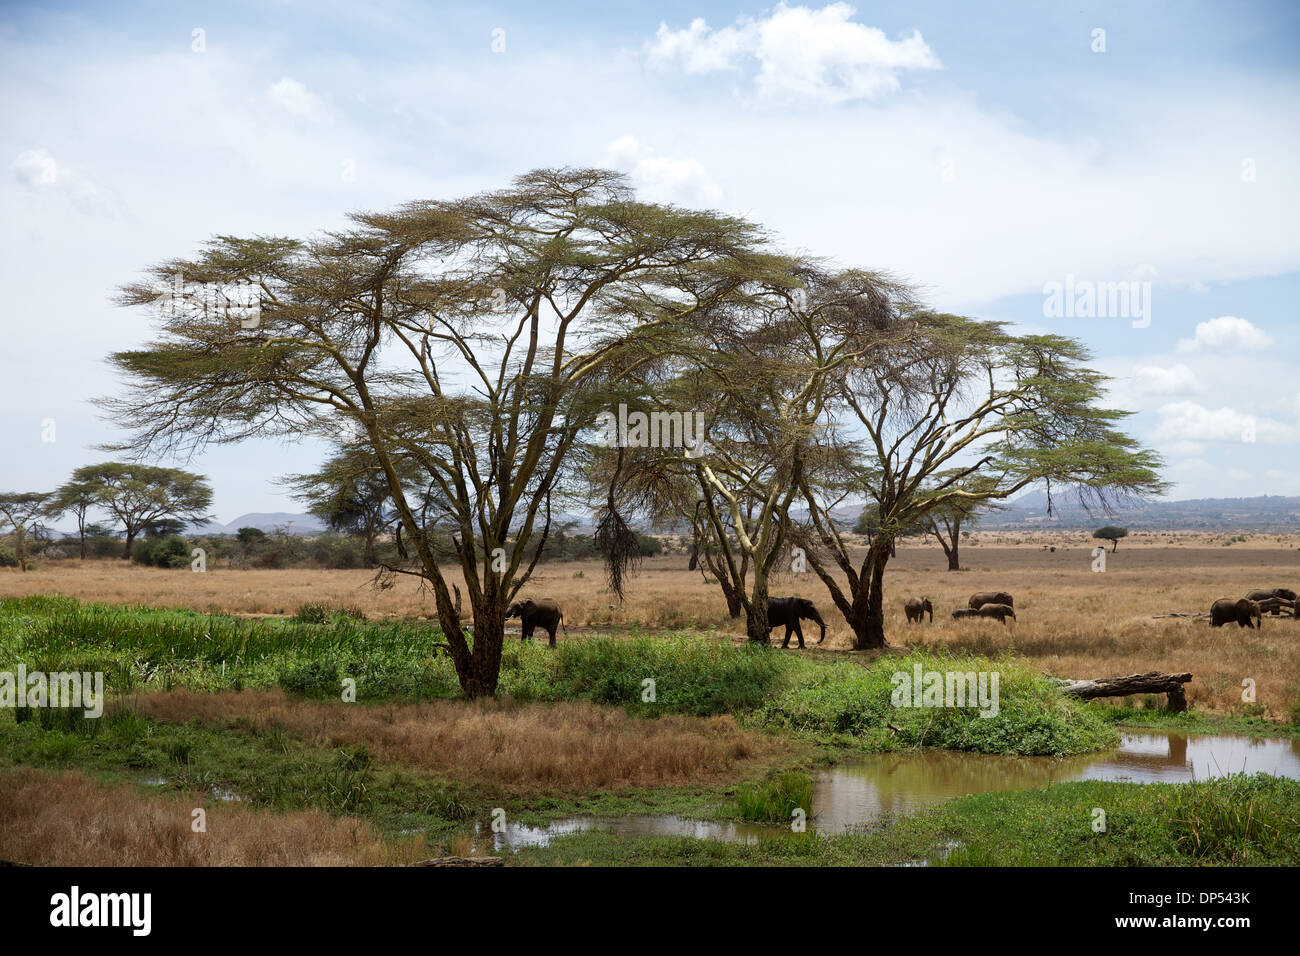 An African landscape scene with fever trees and elephants, Kenya Stock Photo